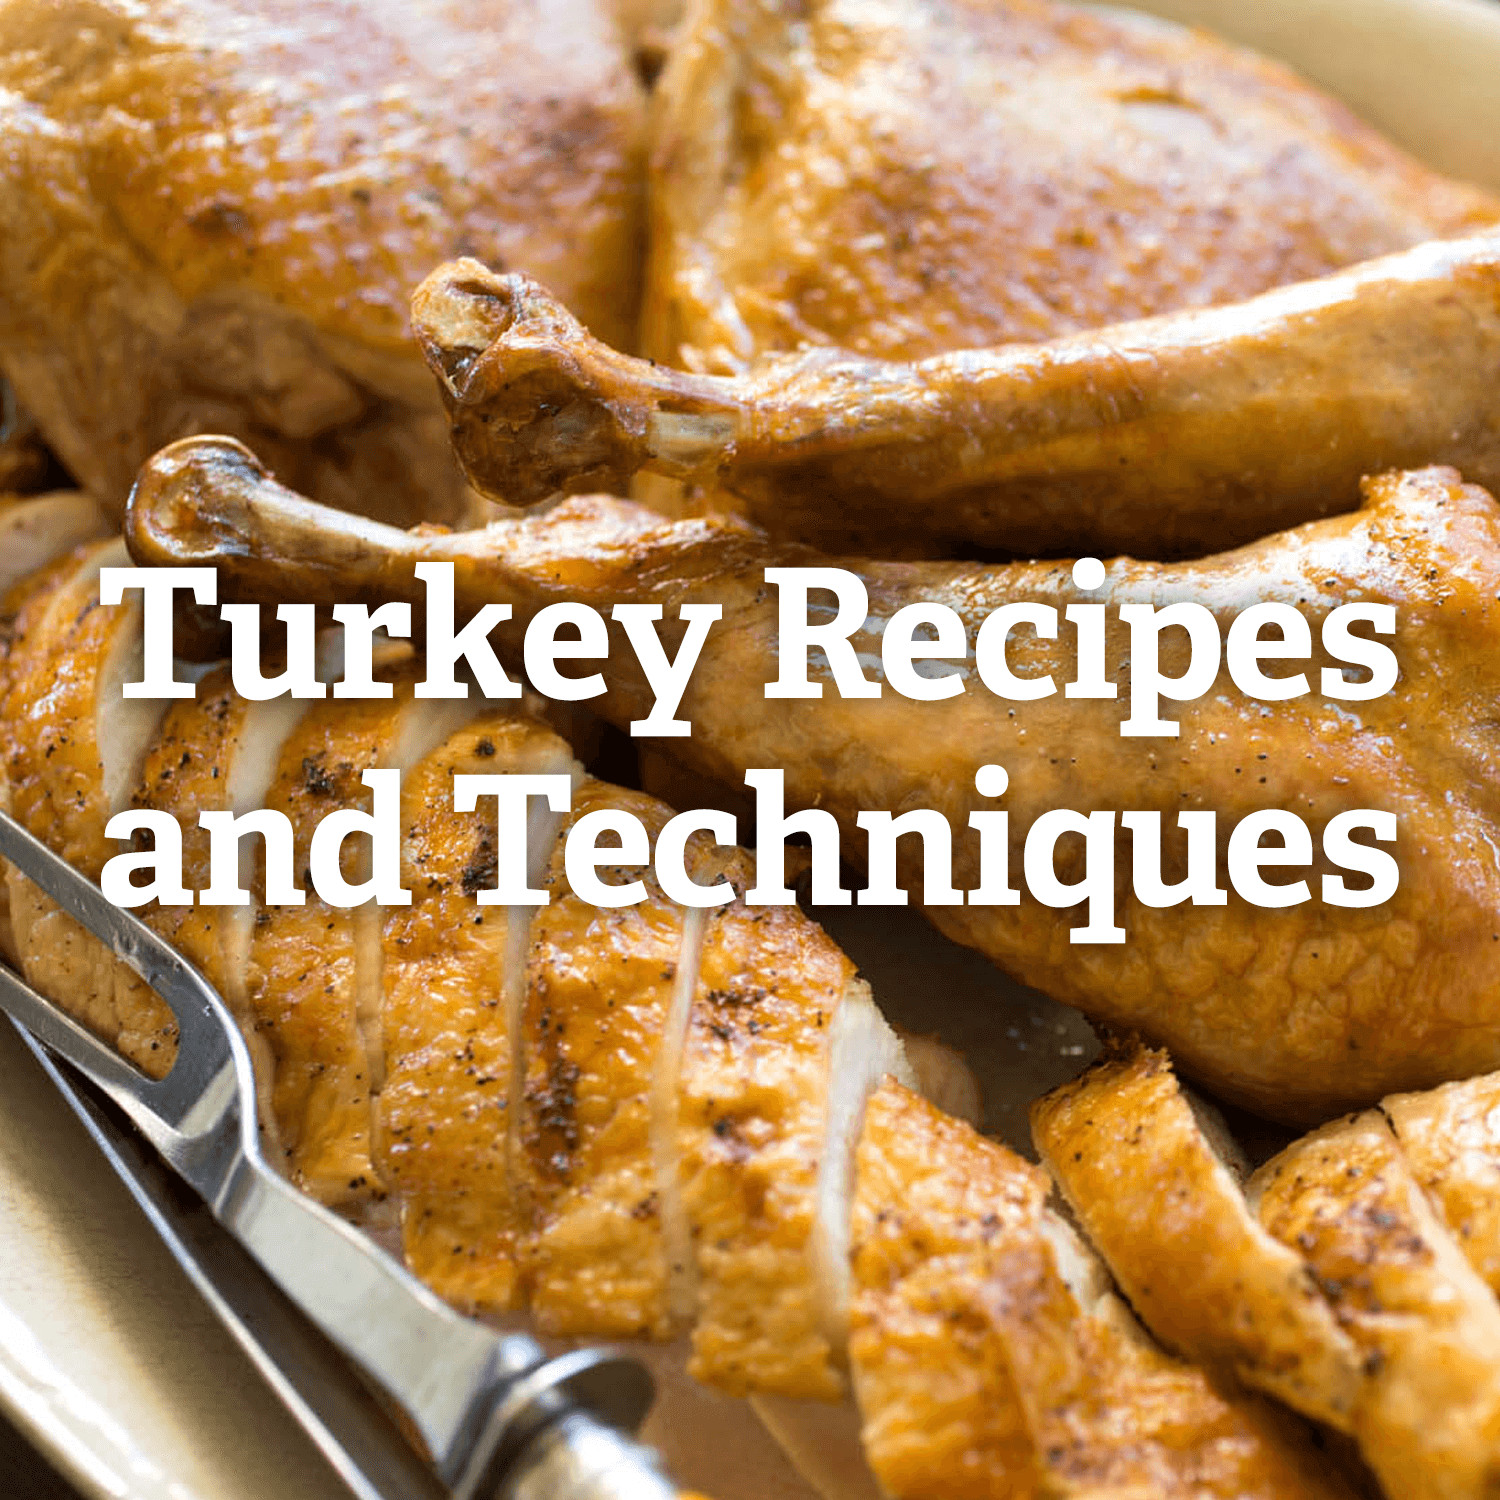 Recipe For Thanksgiving Turkey
 Thanksgiving Turkey Recipes and Techniques